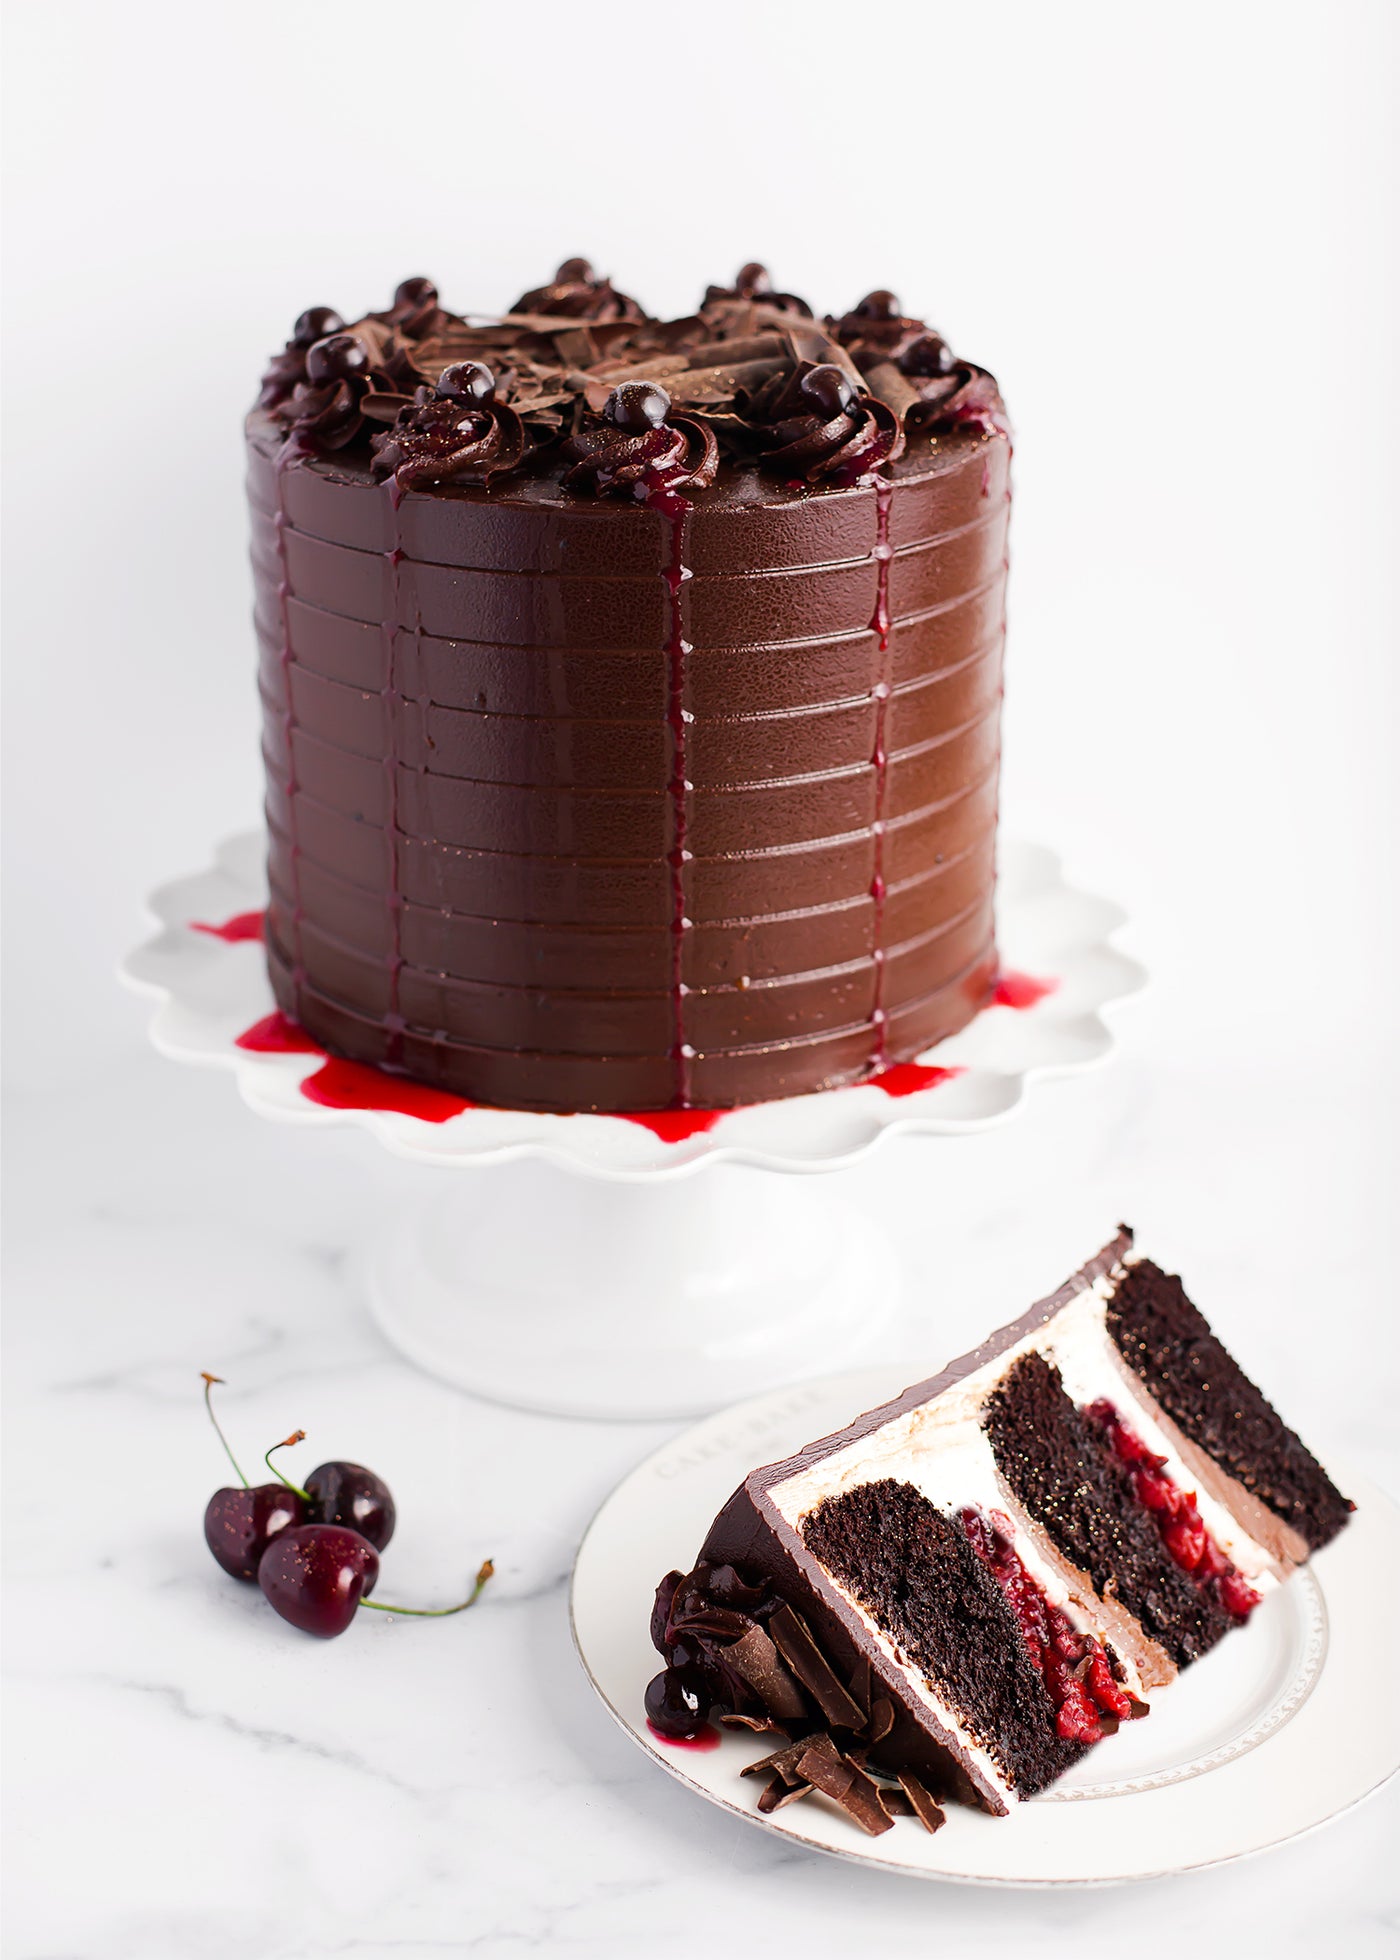 Make all your baking dreams come true easily with Cake Factory